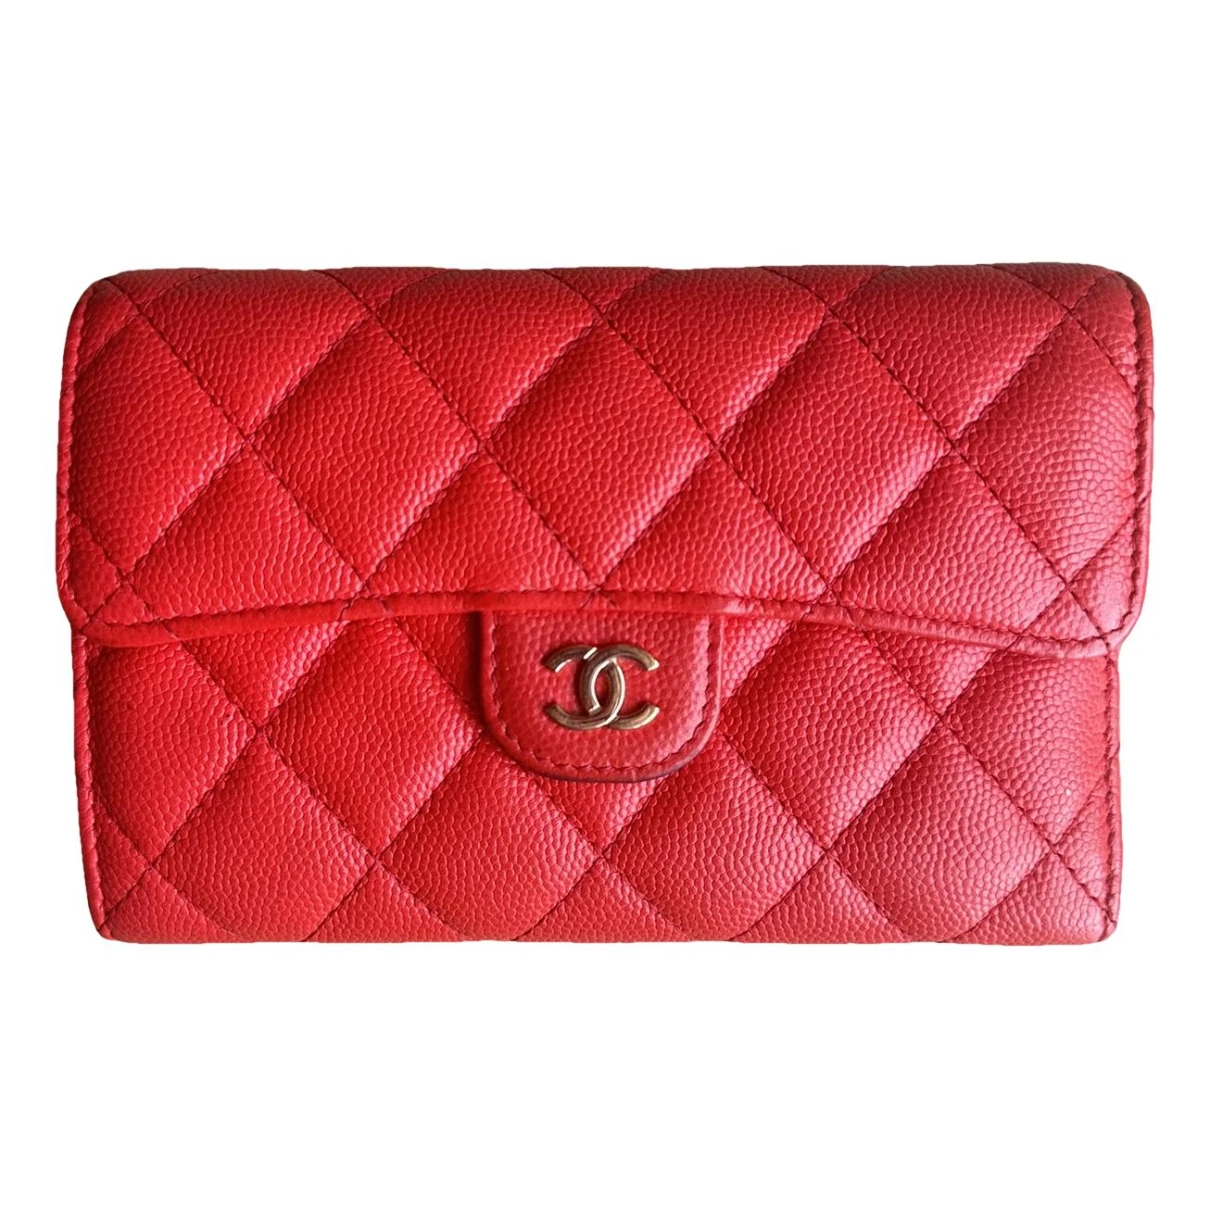 Pre-owned Chanel Timeless/classique Leather Wallet In Orange